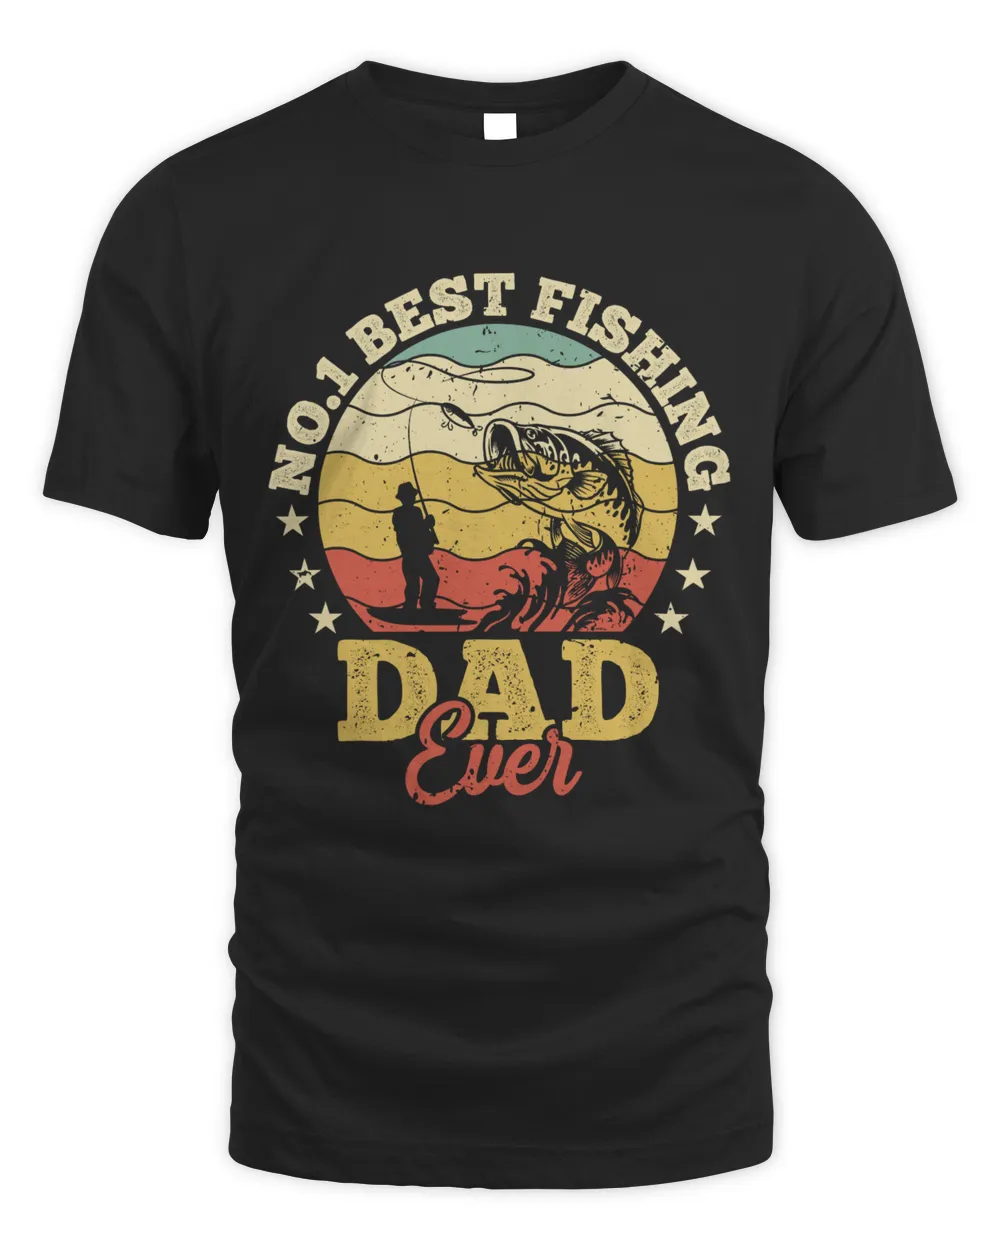 No 1 Best fishing dad ever